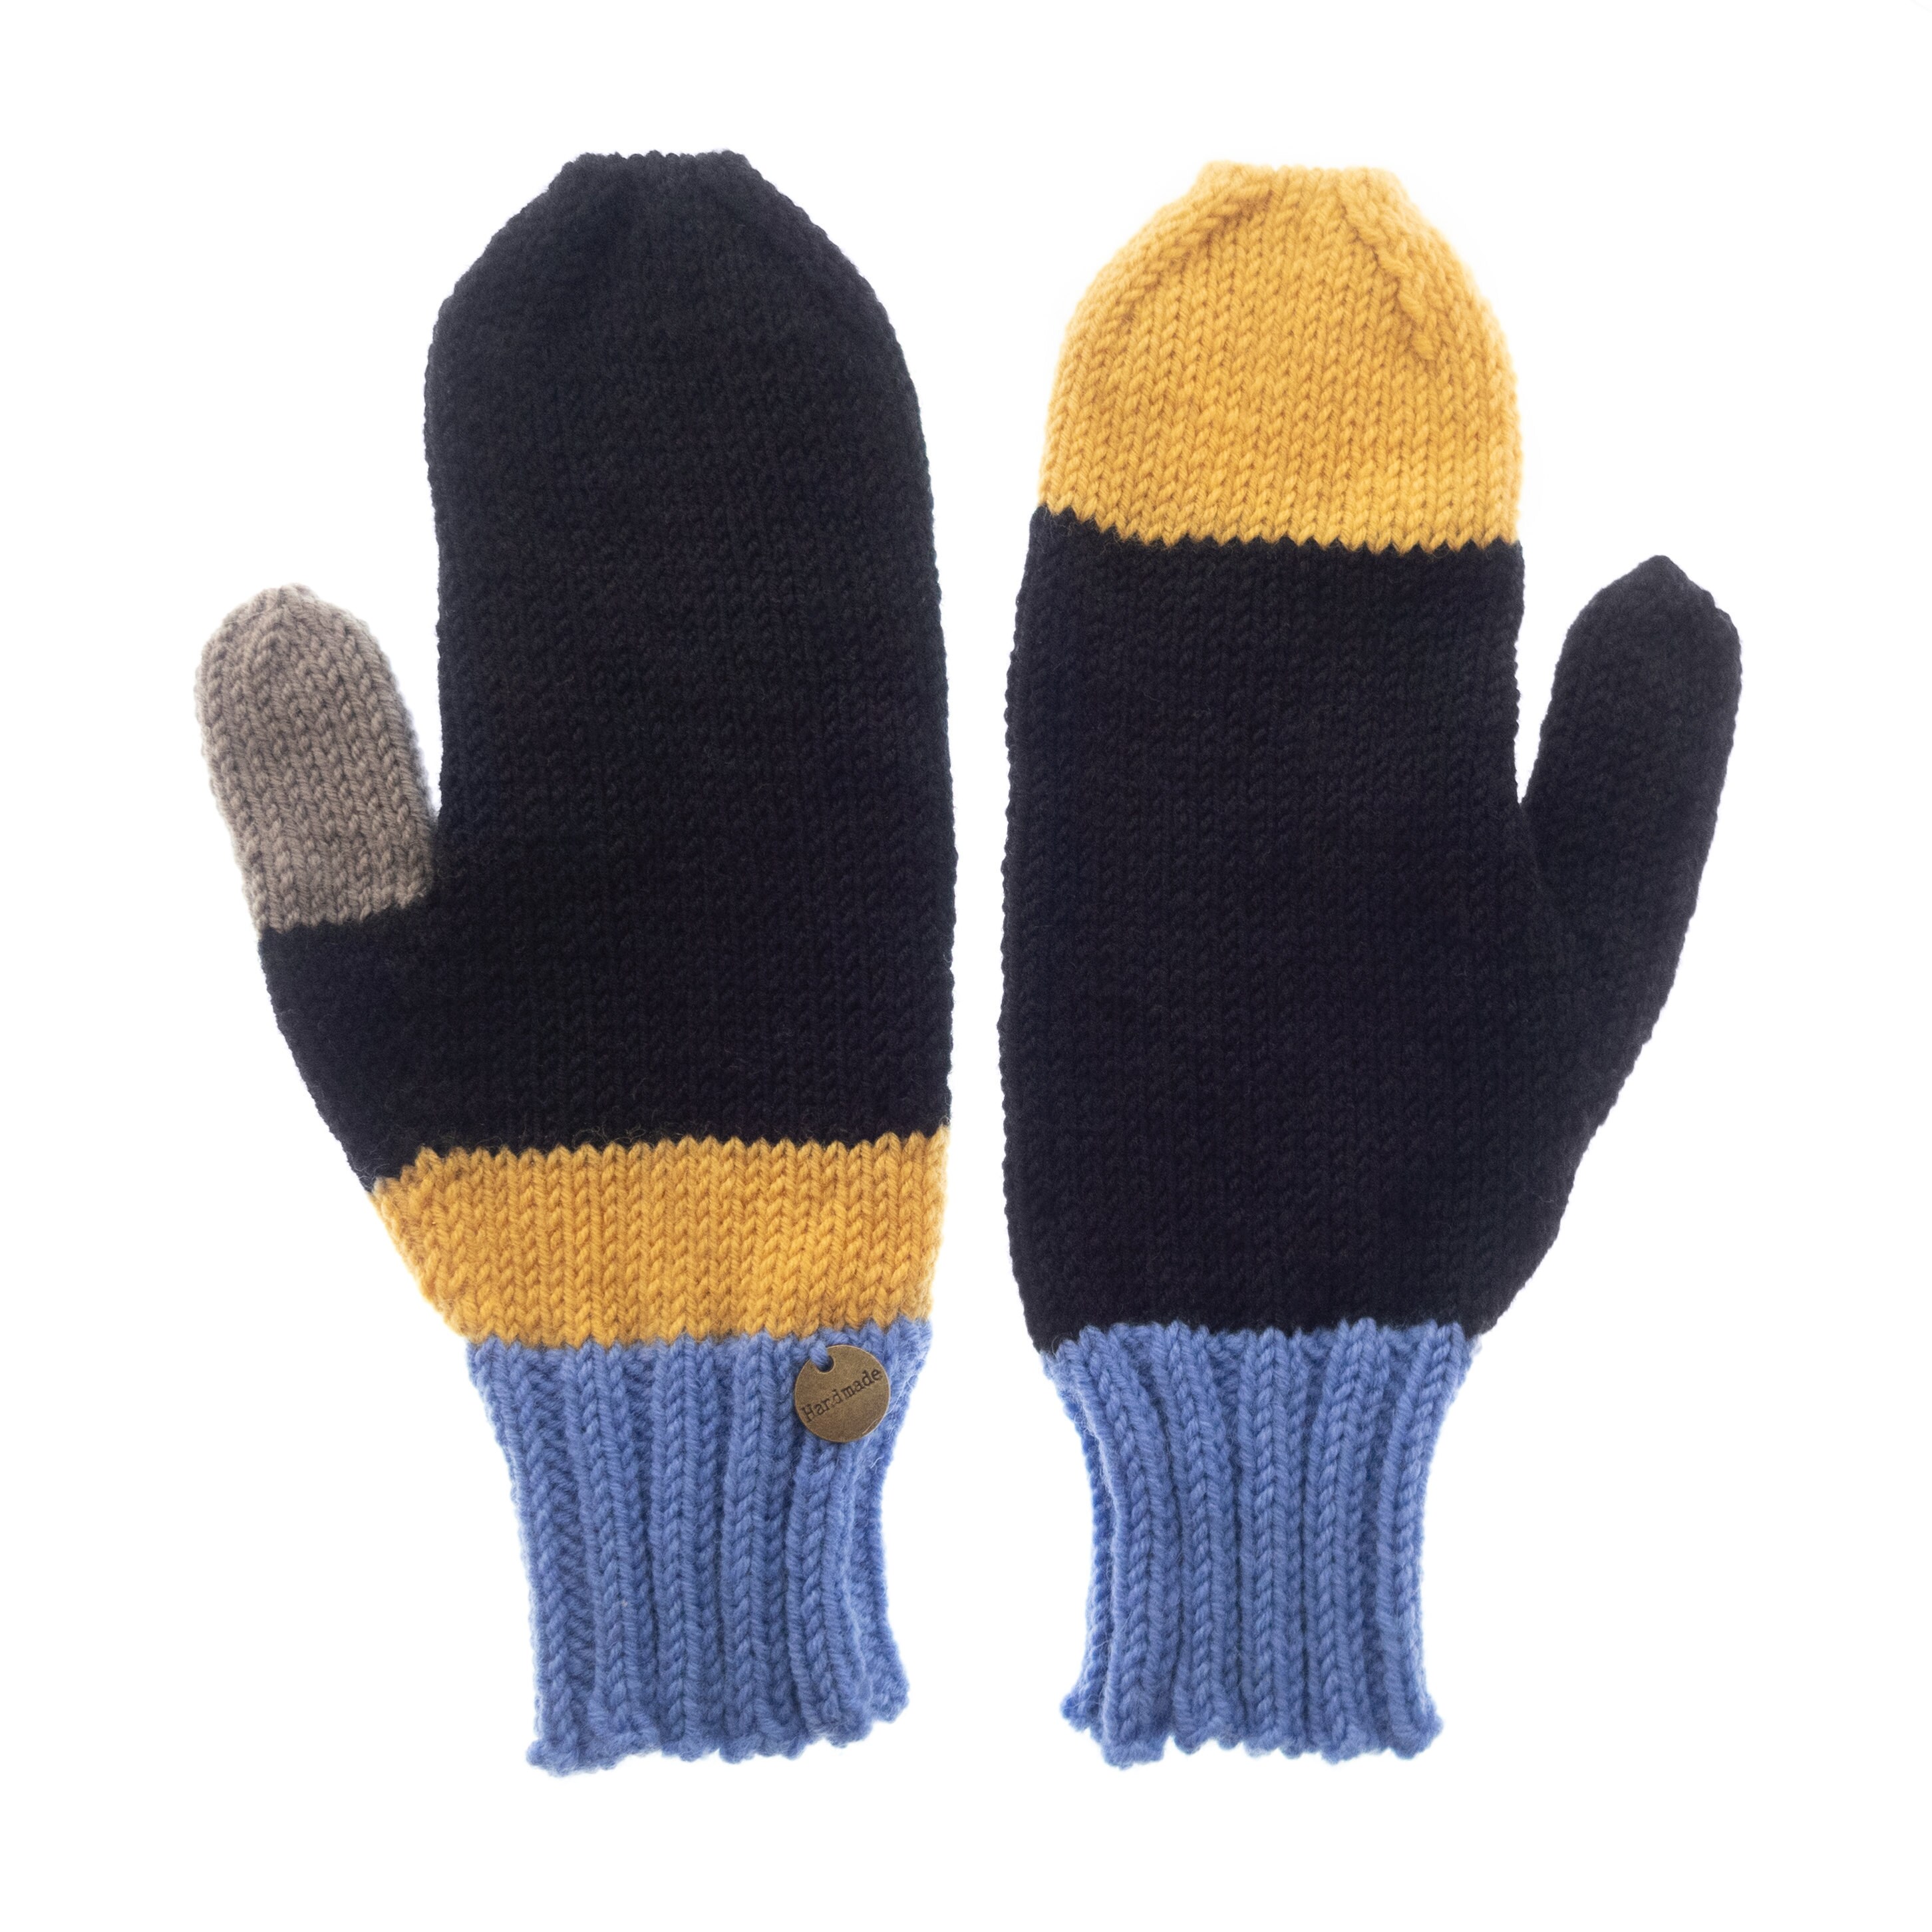 Winter Mittens for Adults, Best Warm Asymmetrical Gloves